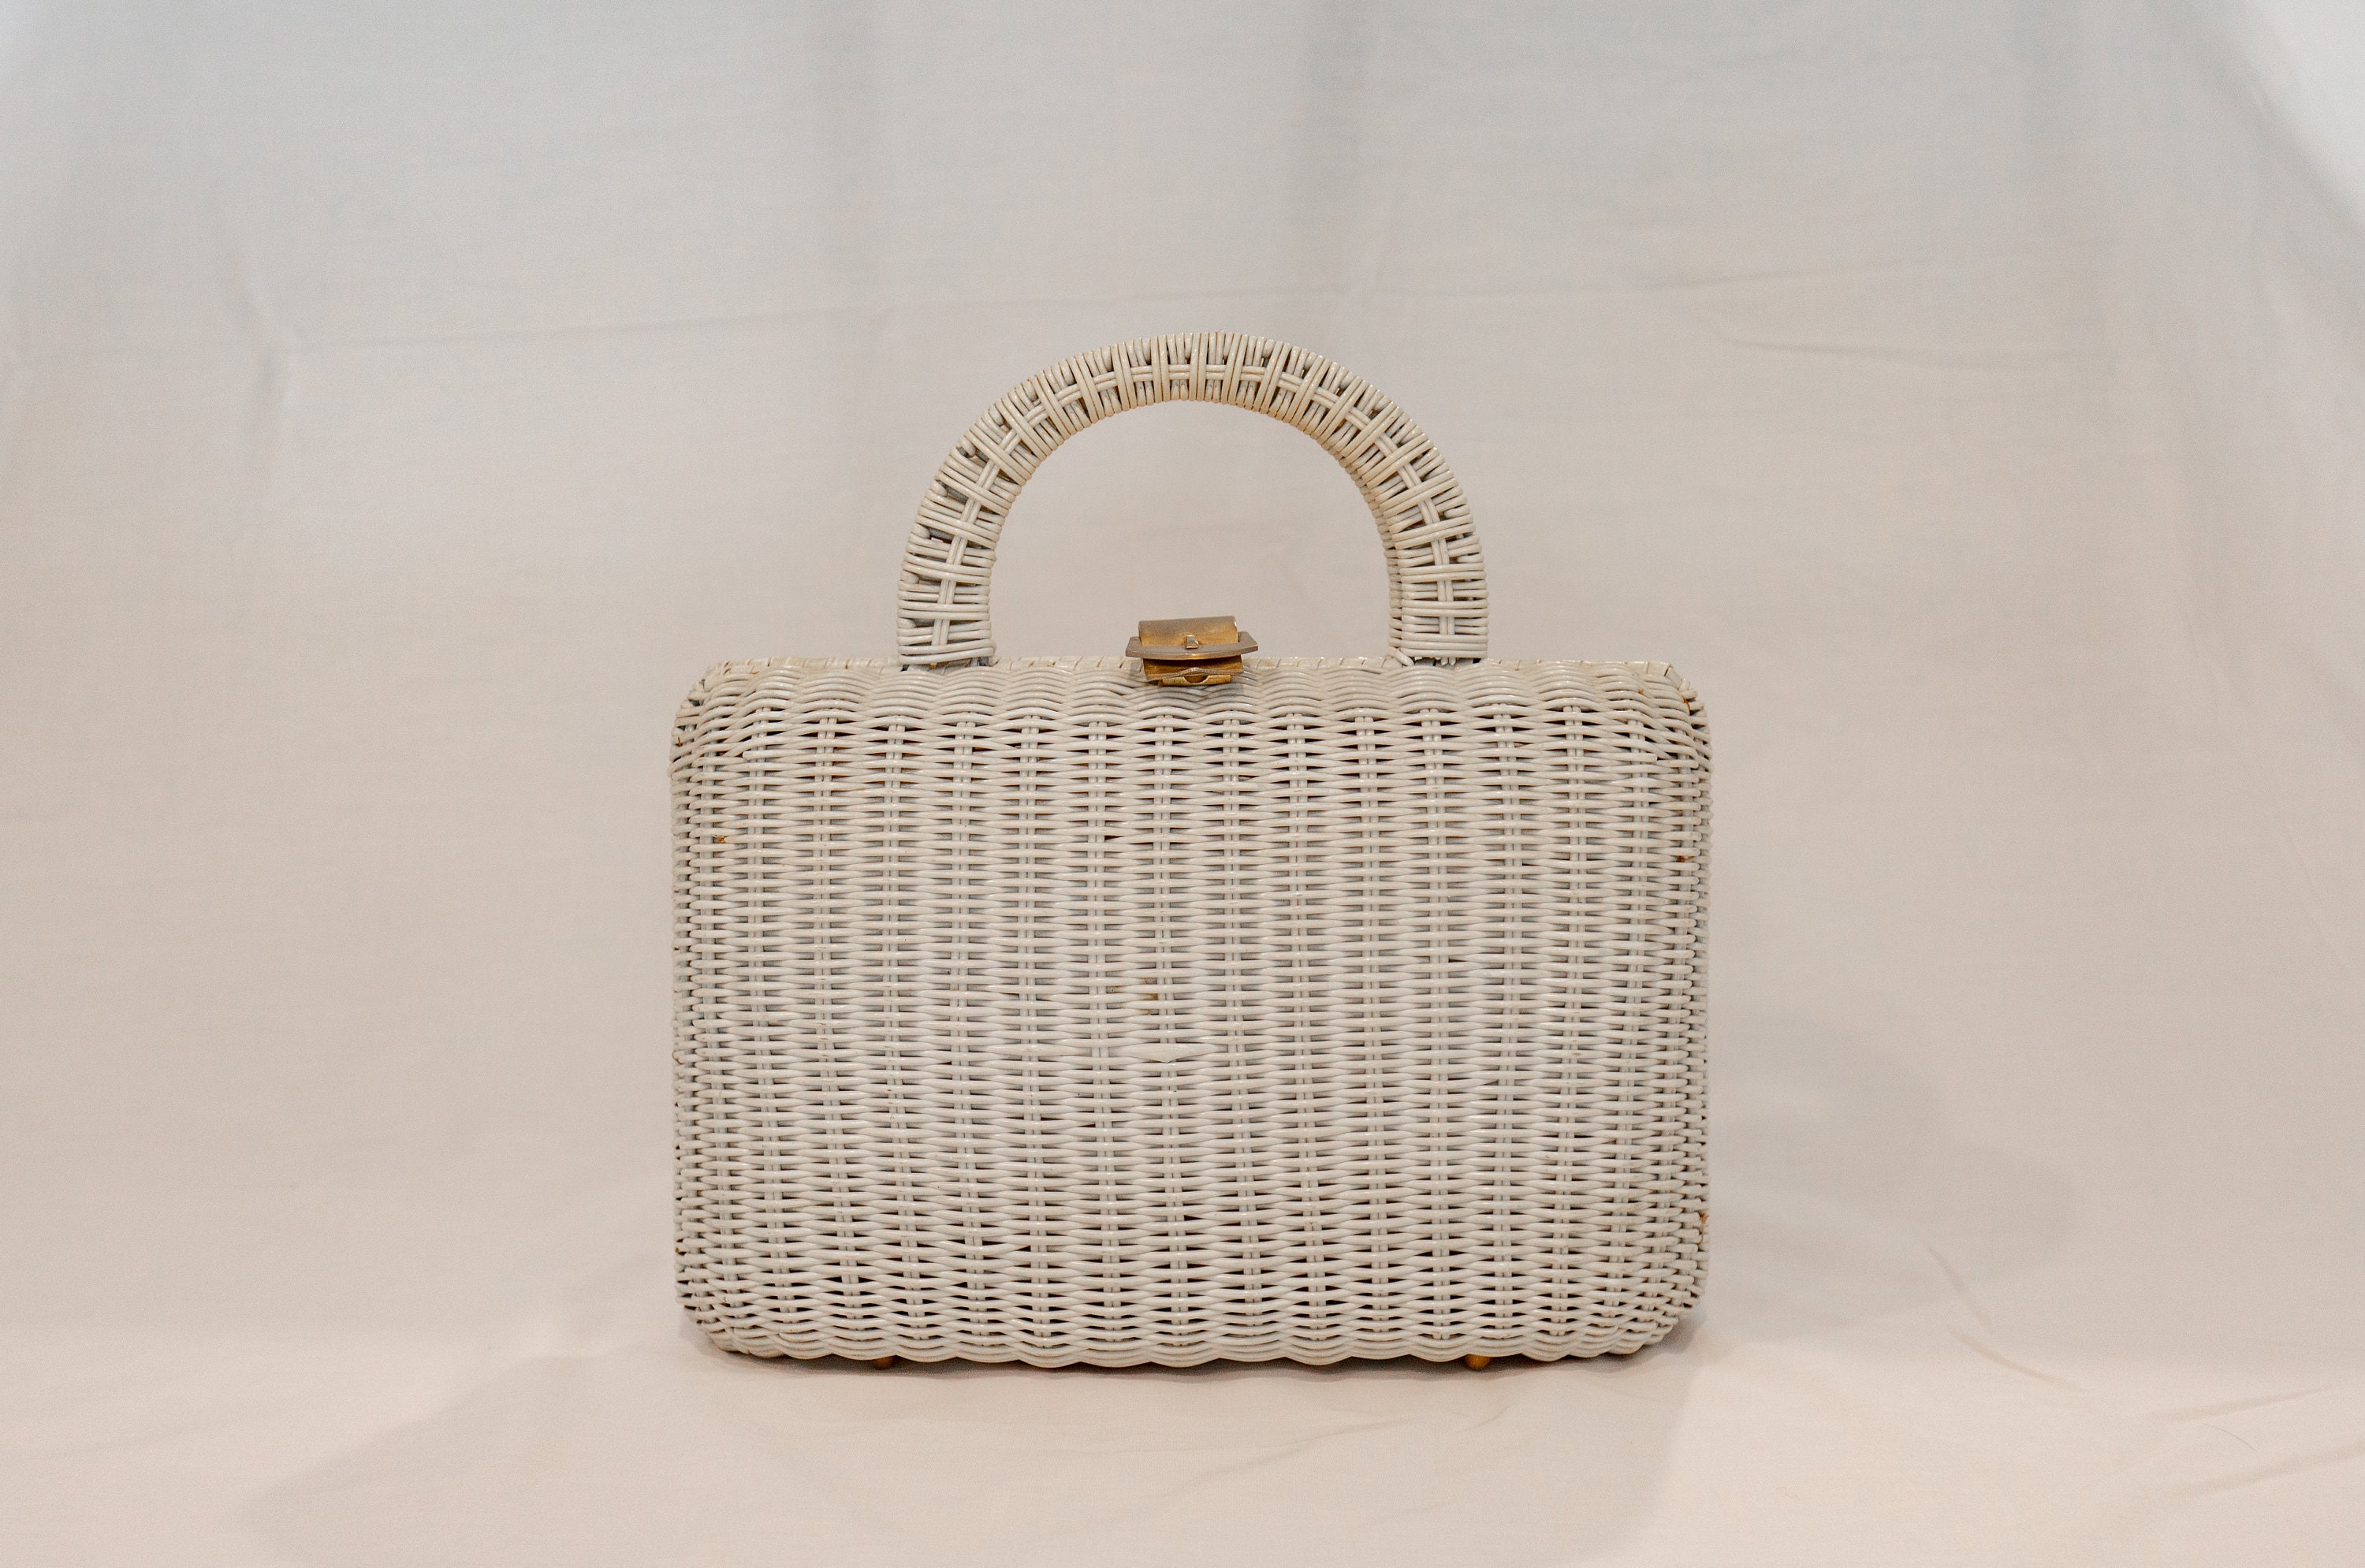 VINTAGE 1960's LARGE RED, WHITE & BLUE WOVEN WICKER PURSE – The LP Golf  Collection